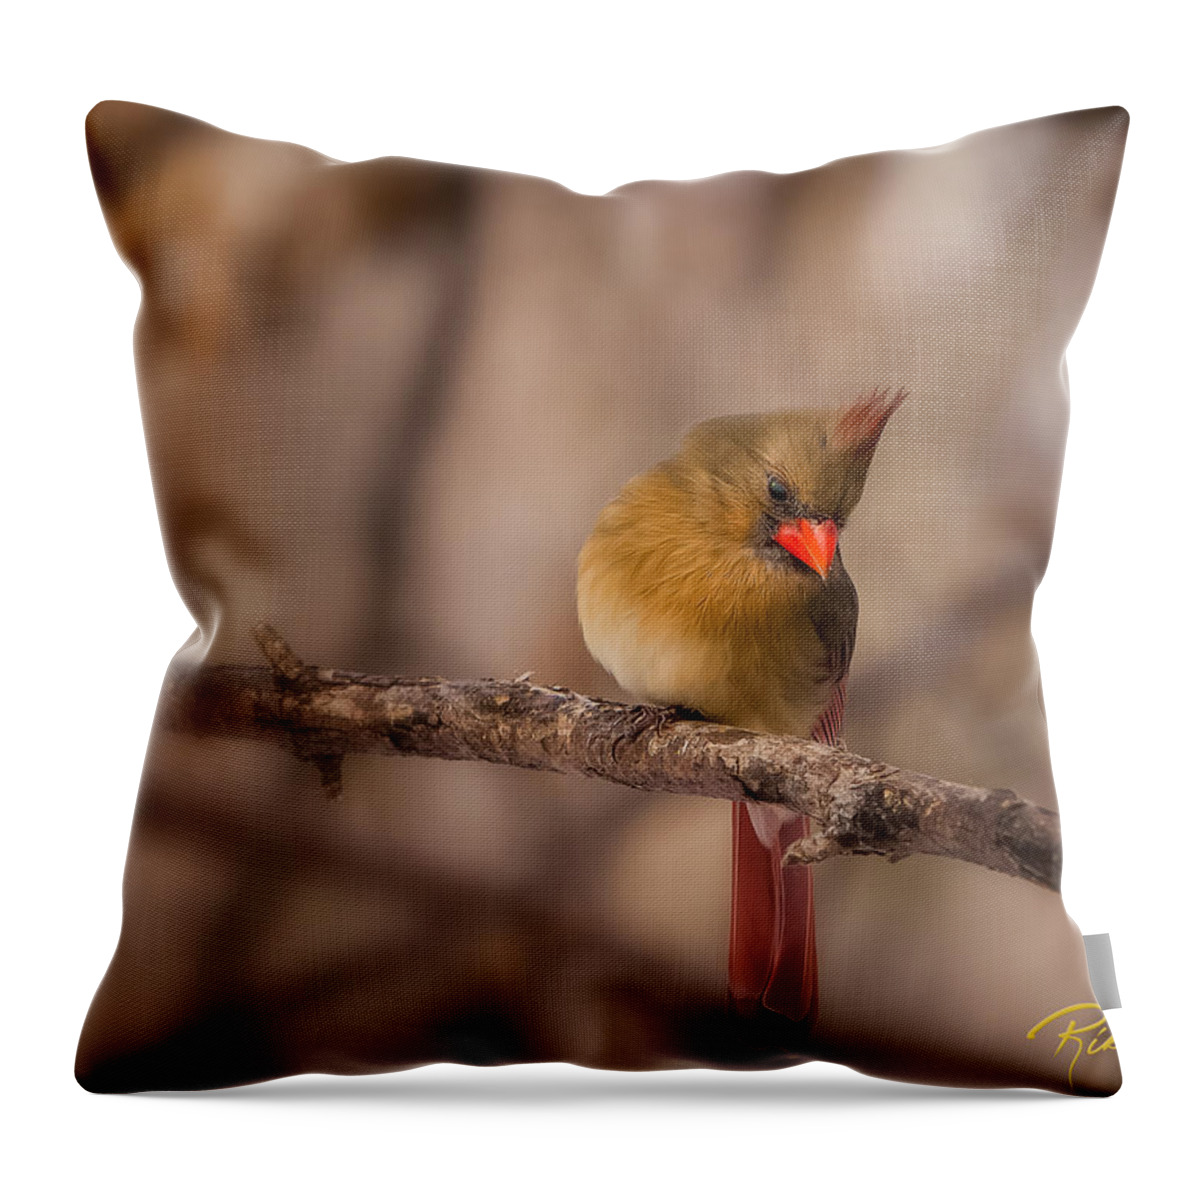 Animals Throw Pillow featuring the photograph Female Cardinal by Rikk Flohr